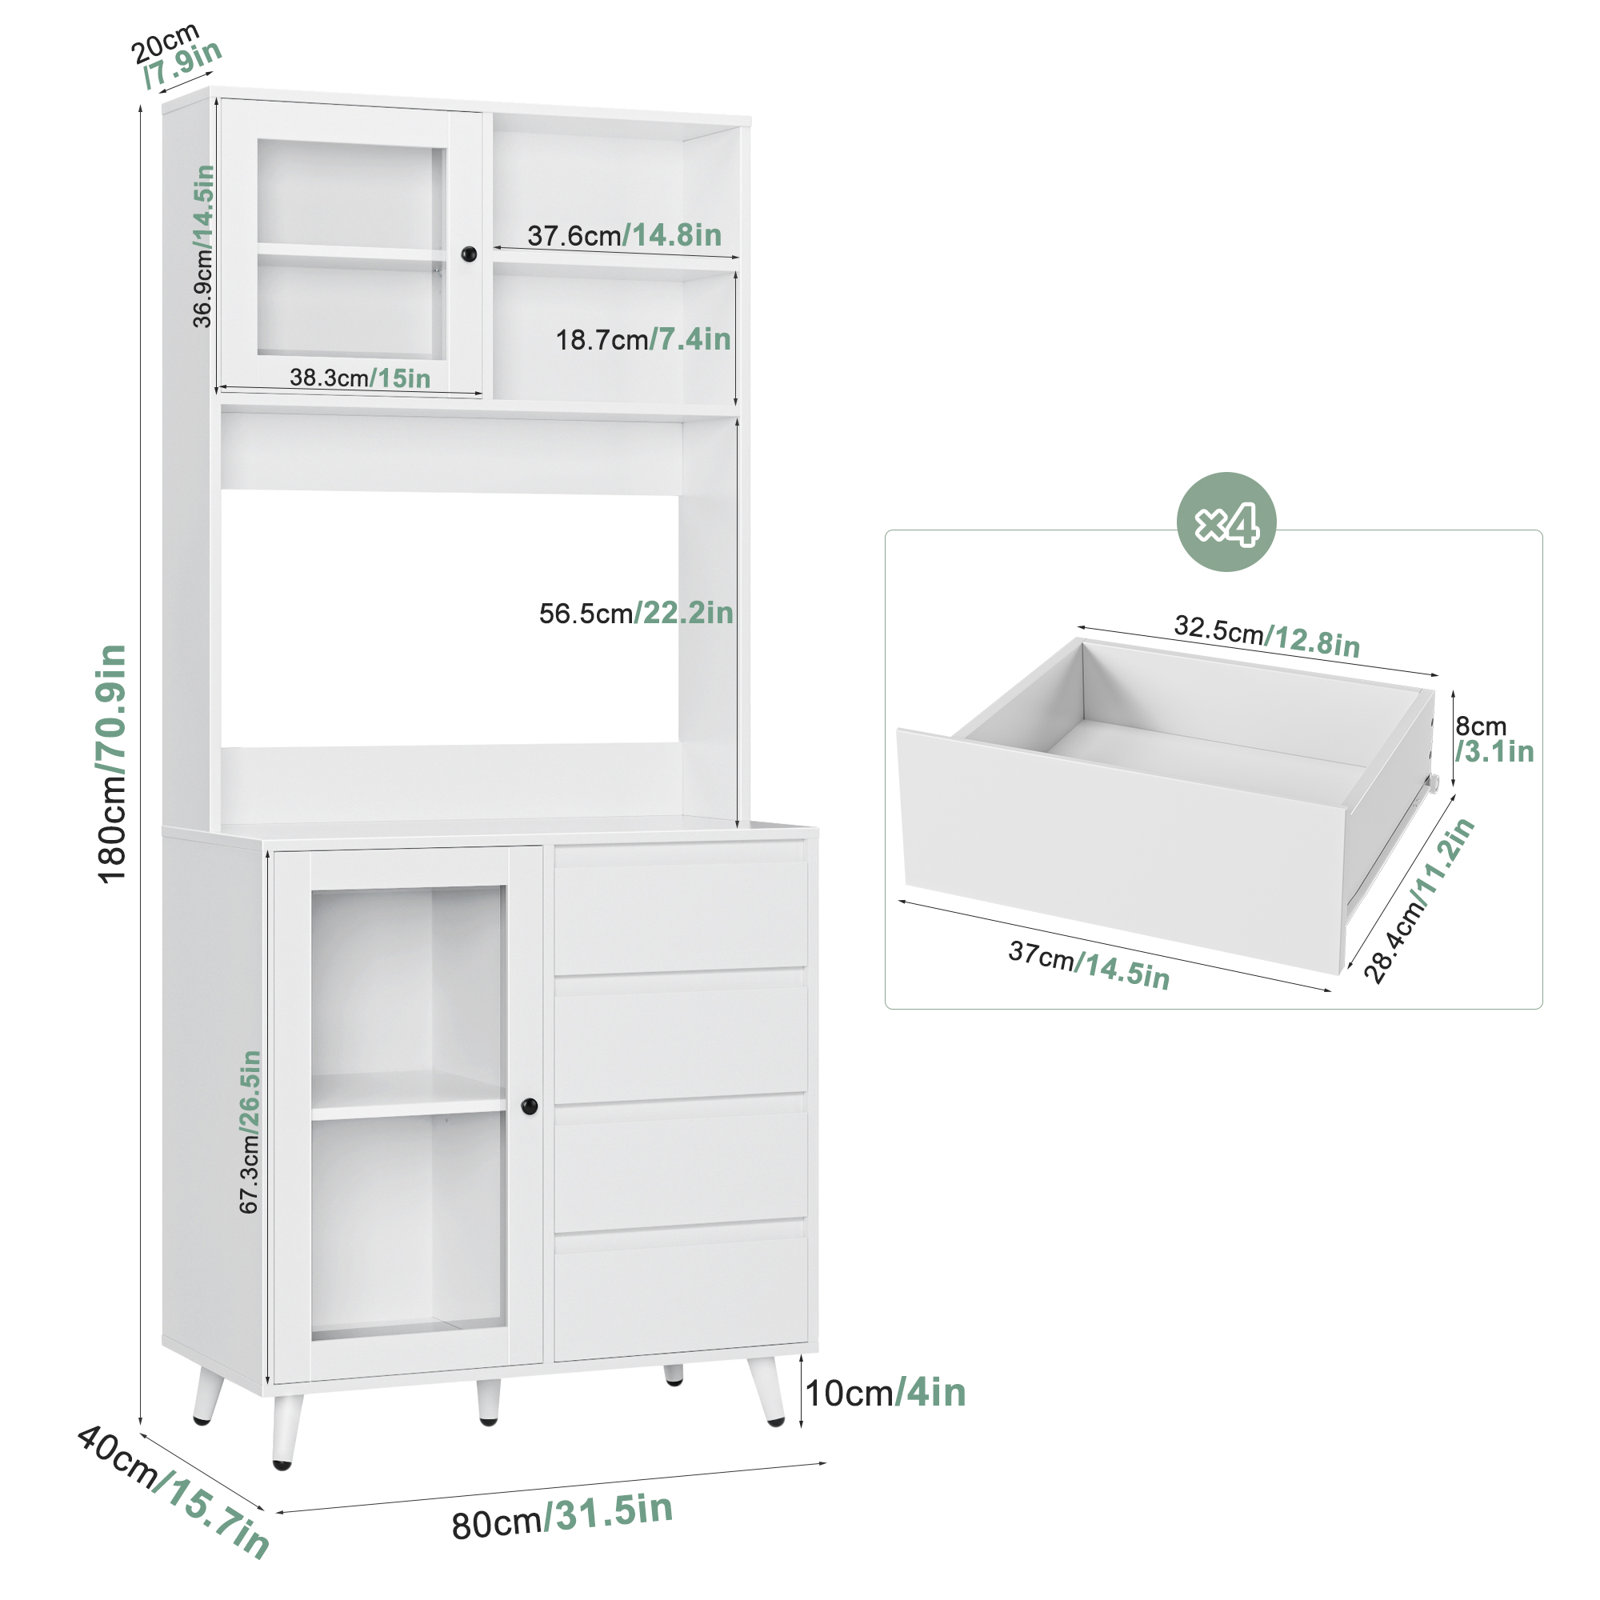 Homfa 70'' Tall Kitchen Pantry Cabinet with Tempered Glass Doors, Large Countertop Microwave Storage Cabinet with 2 Adjustable Shelves, White - image 2 of 10